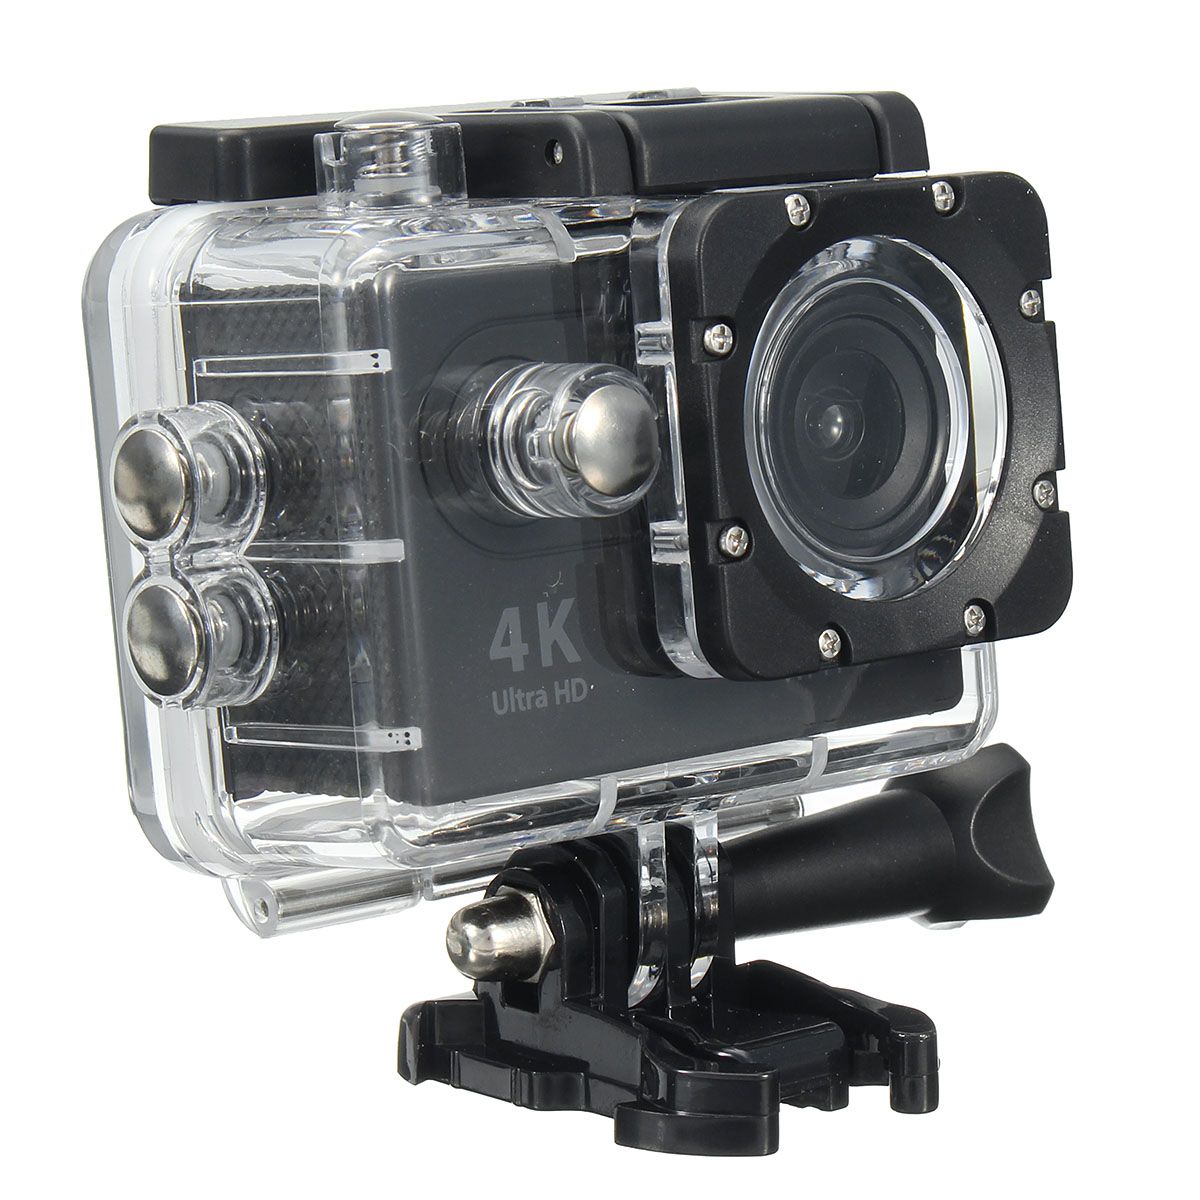 H9-1080P-HD-Waterproof-WIFI-Wide-Angle-Action-Sport-Camera-for-Swimming-Hiking-Climbing-1639179